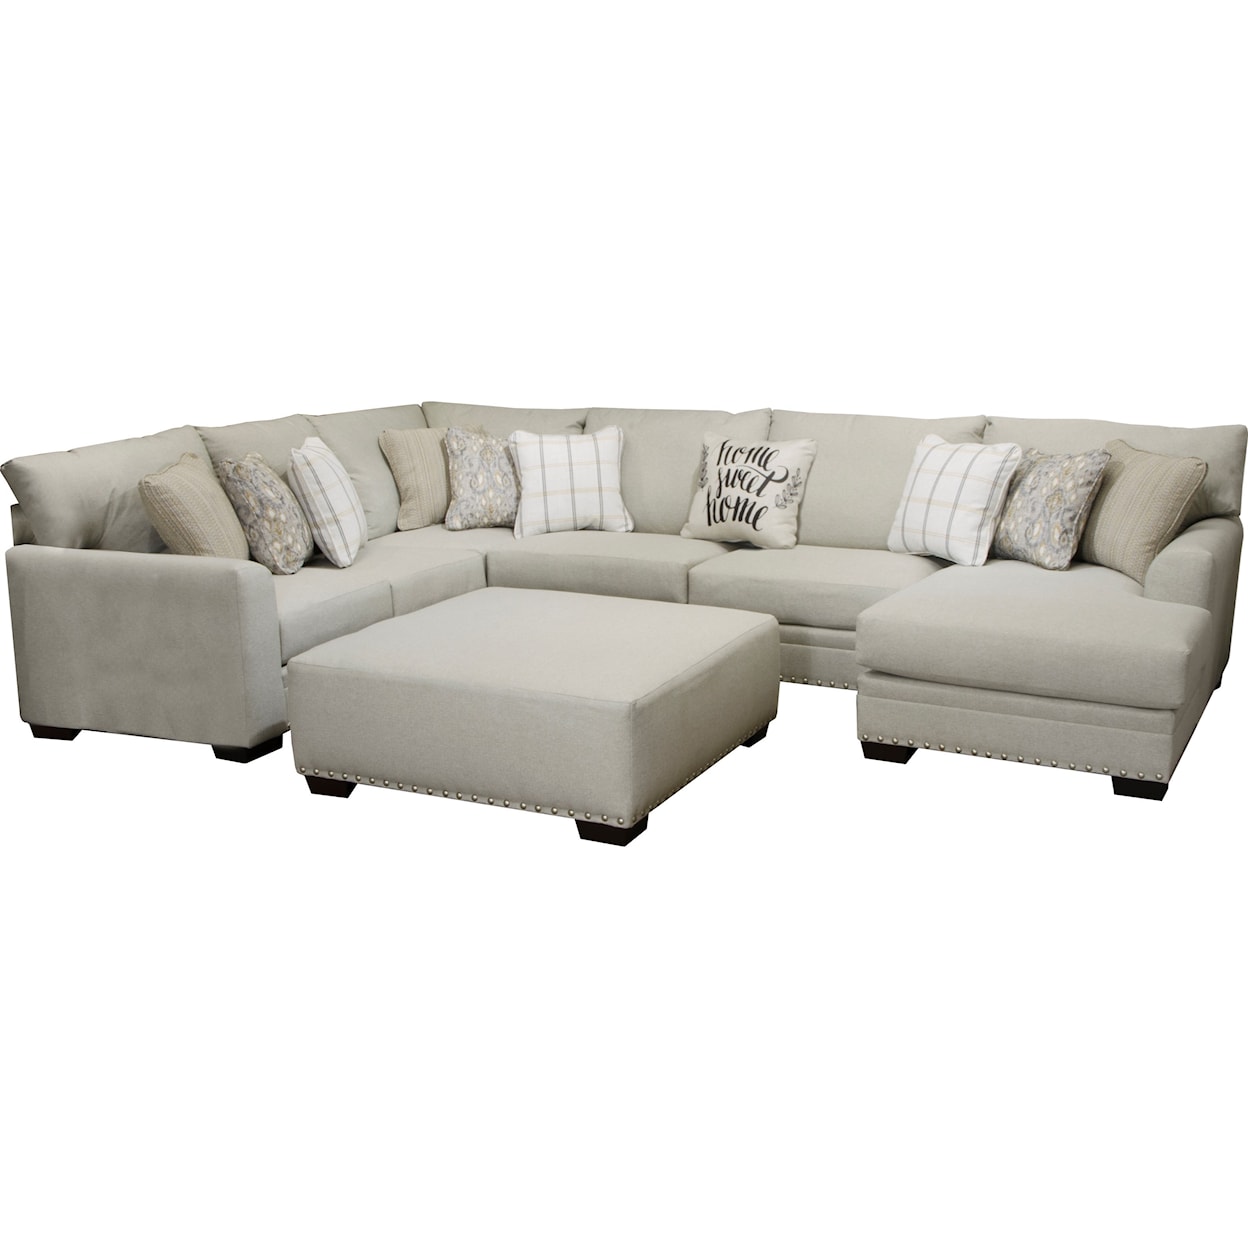 Jackson Furniture 4478 Middleton 4pc Chaise Sectional and Ottoman